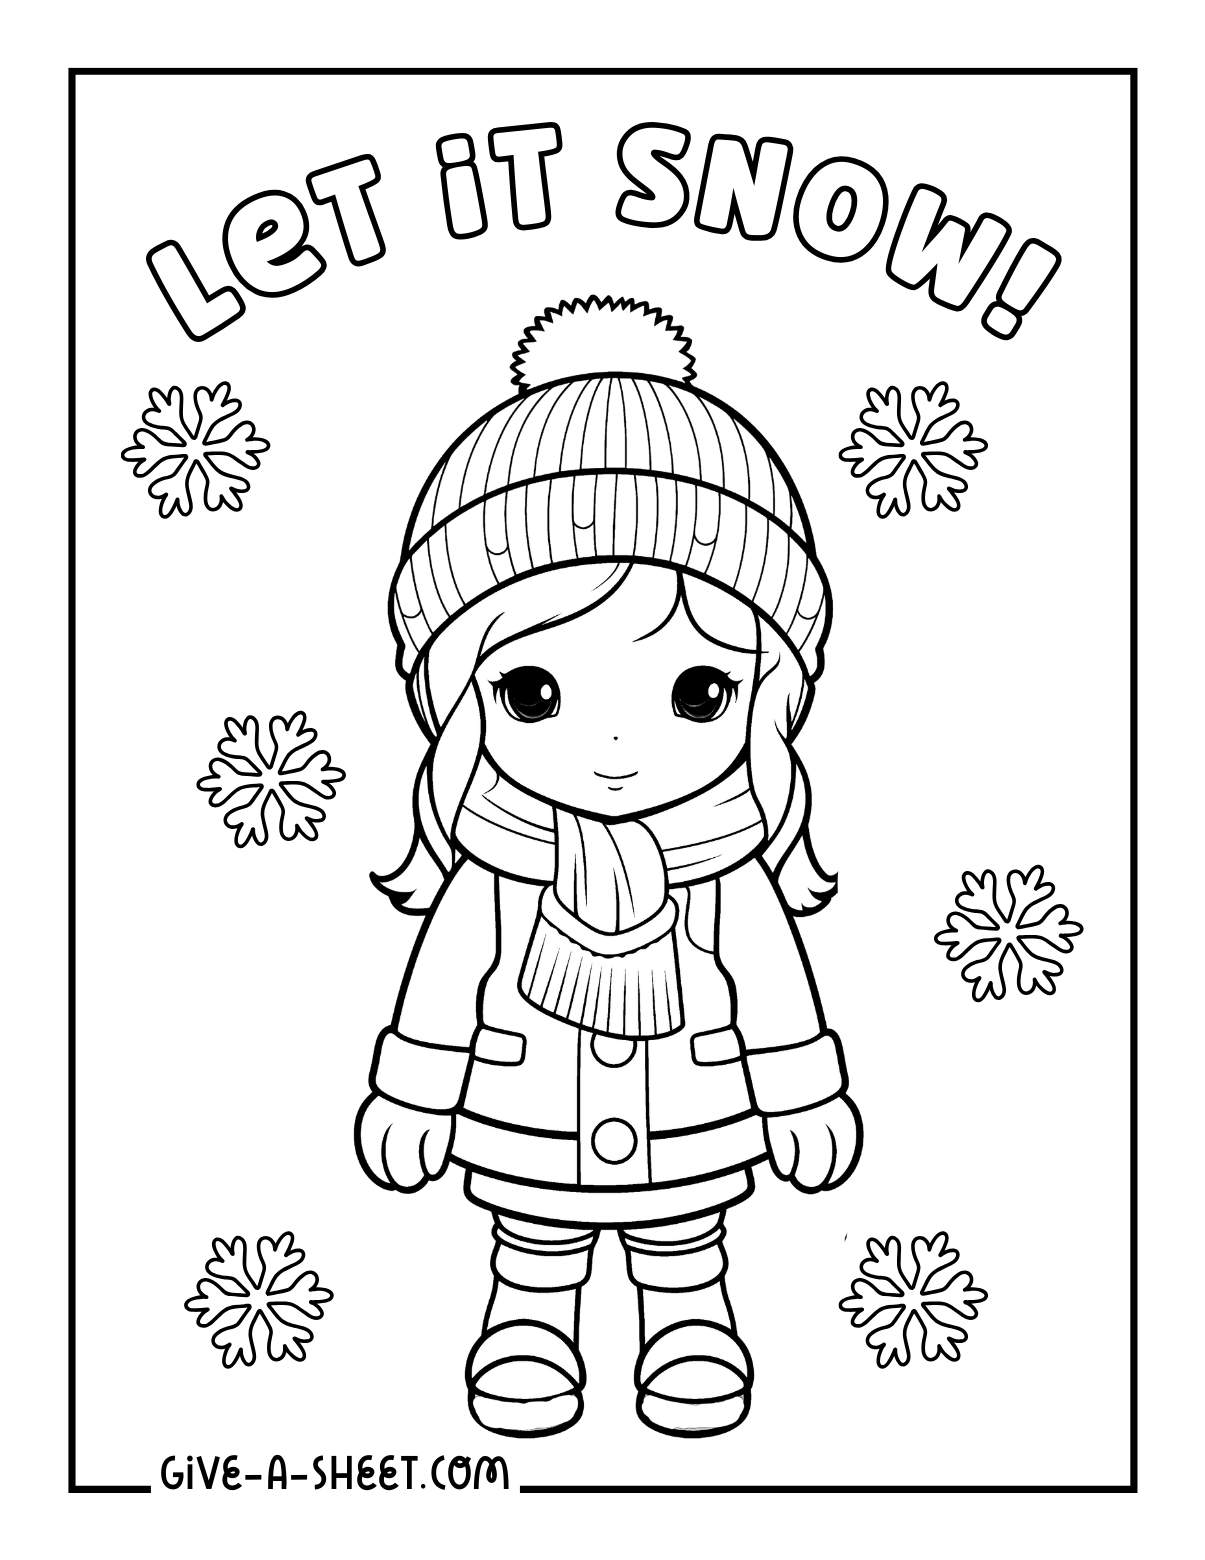 Girl wearing a beanie, scarf and jacket winter coloring sheet.